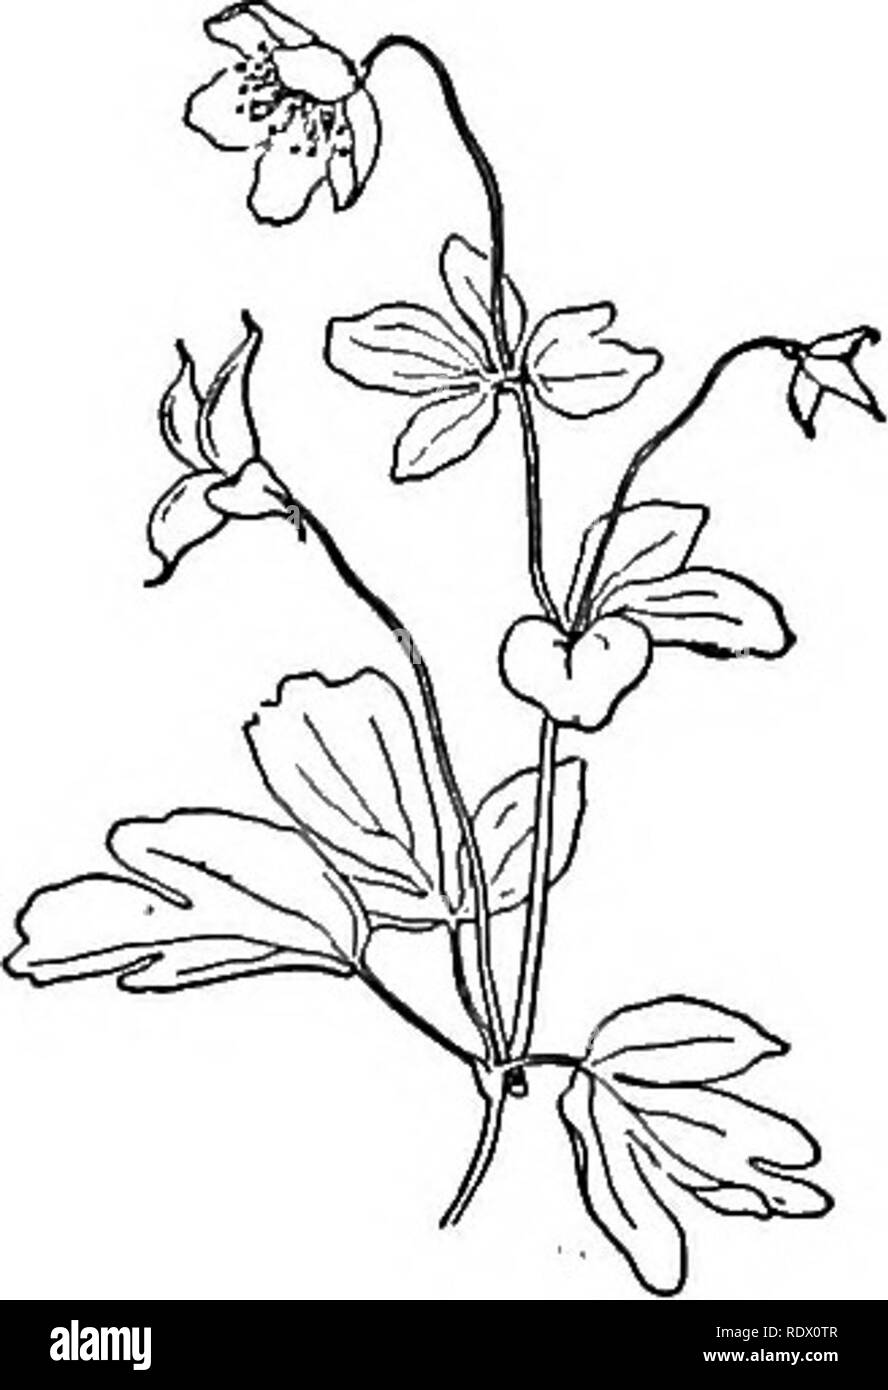 . A spring flora for high schools. Botany. Sepals 5, petal-like, deciduous, more, the styles pointed. Stamens 10-40. Pistils 3-6 or I. biternatum. Fibers of the root thickened here and there into little tubers. Moist and shady woods and cliffs. May. caltha' Glabrous, hydrophytic perennials with round and heart-shaped large leaves. Sepals 5-9, petal-like. Pistils 5—10 with scarcely any styles. C. palustris, Marsh Marigold. Swamps and wet meadows in April and June. The stem is hollow and furrowed. The sepals are broadly oval and bright yellow. Sometimes used for greens when young. The brilliant  Stock Photo